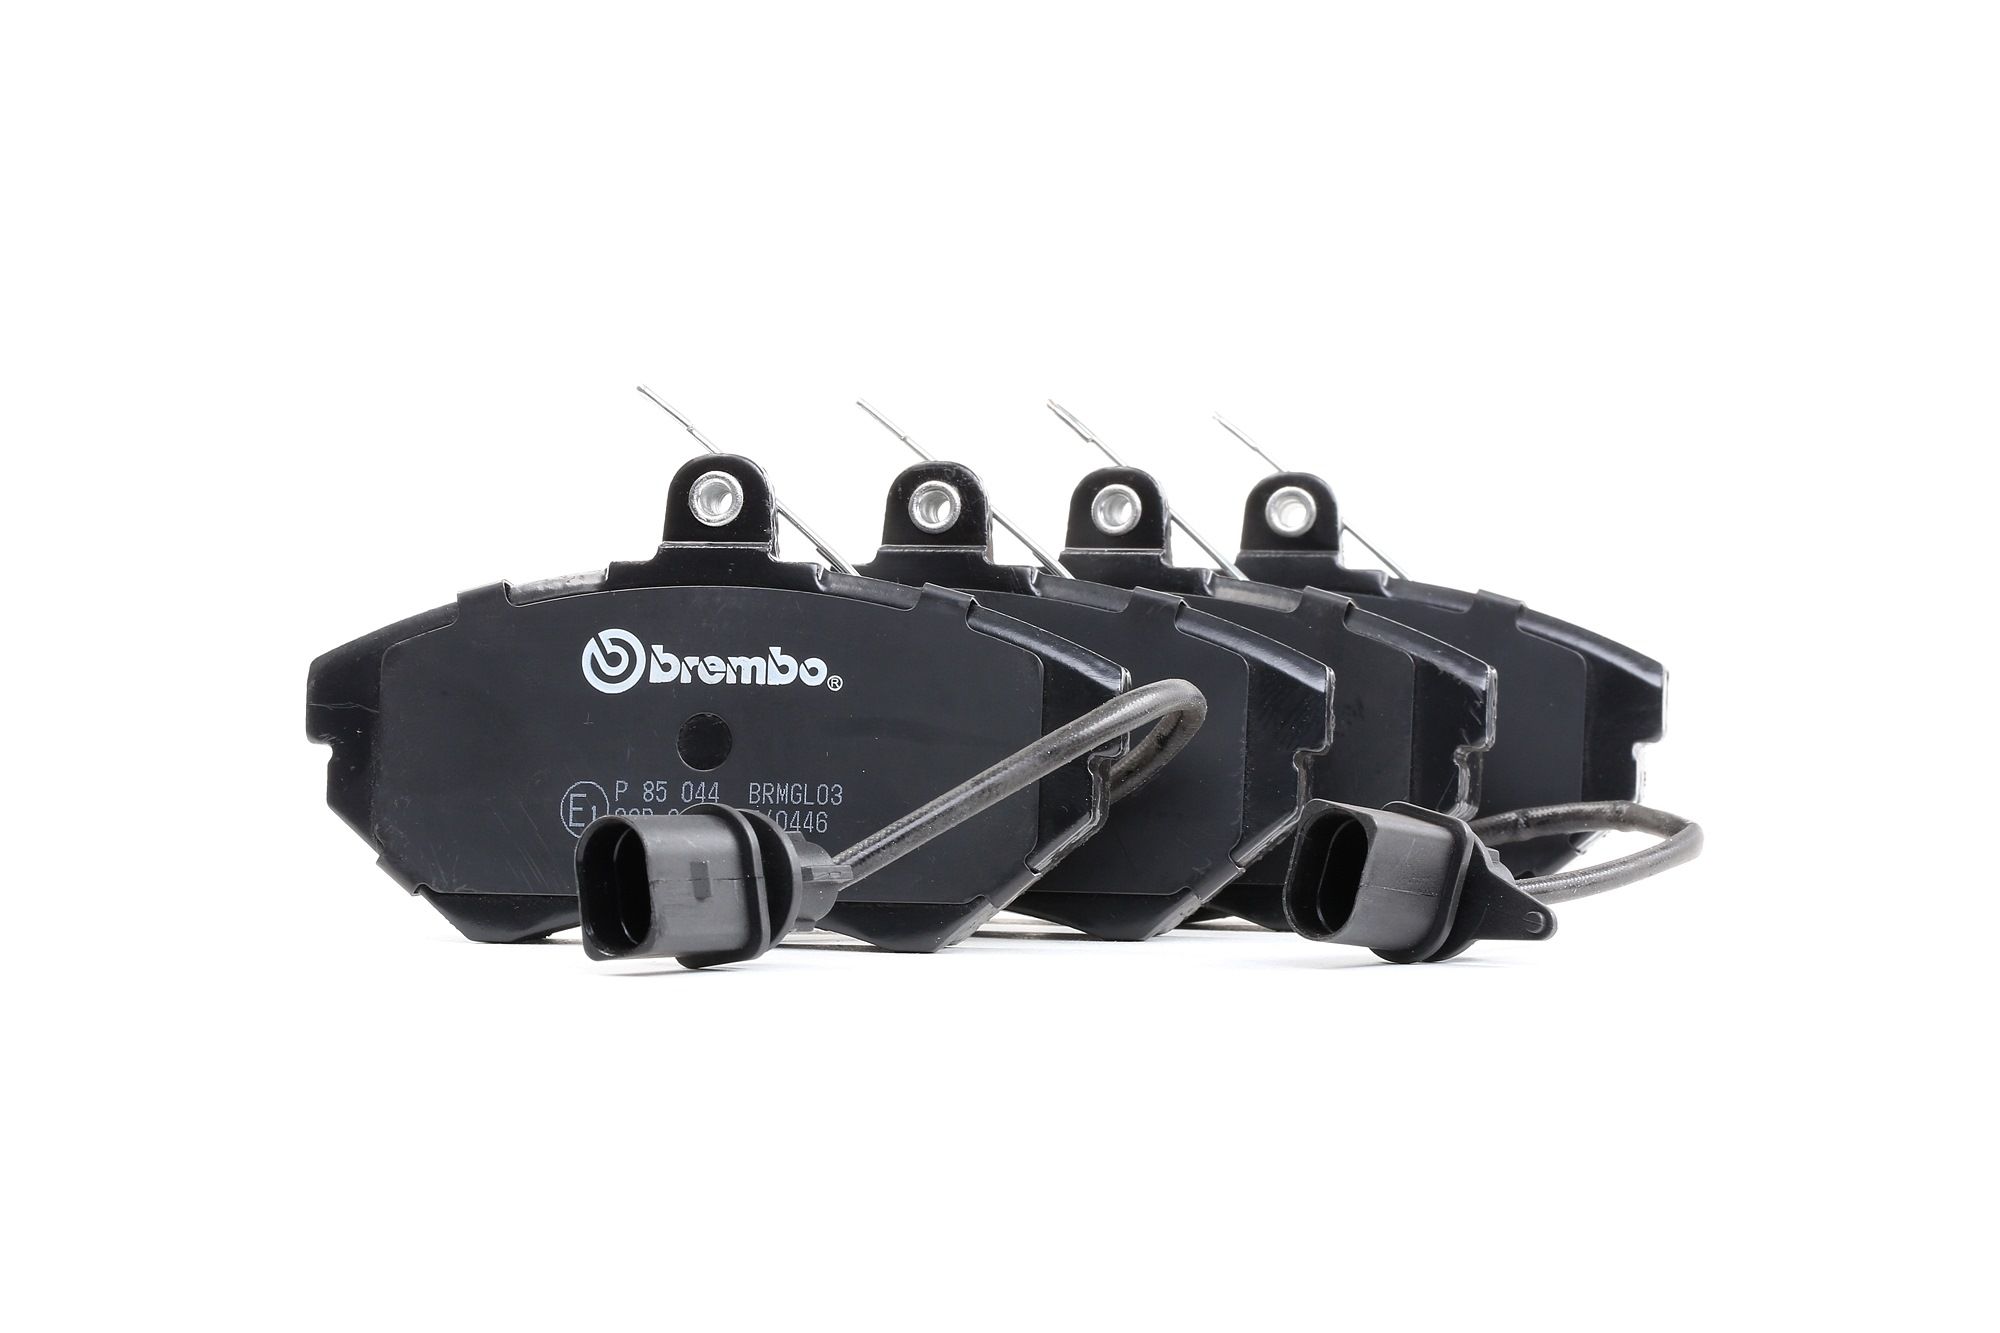 BREMBO P 85 044 Brake pad set incl. wear warning contact, with brake caliper screws, without accessories